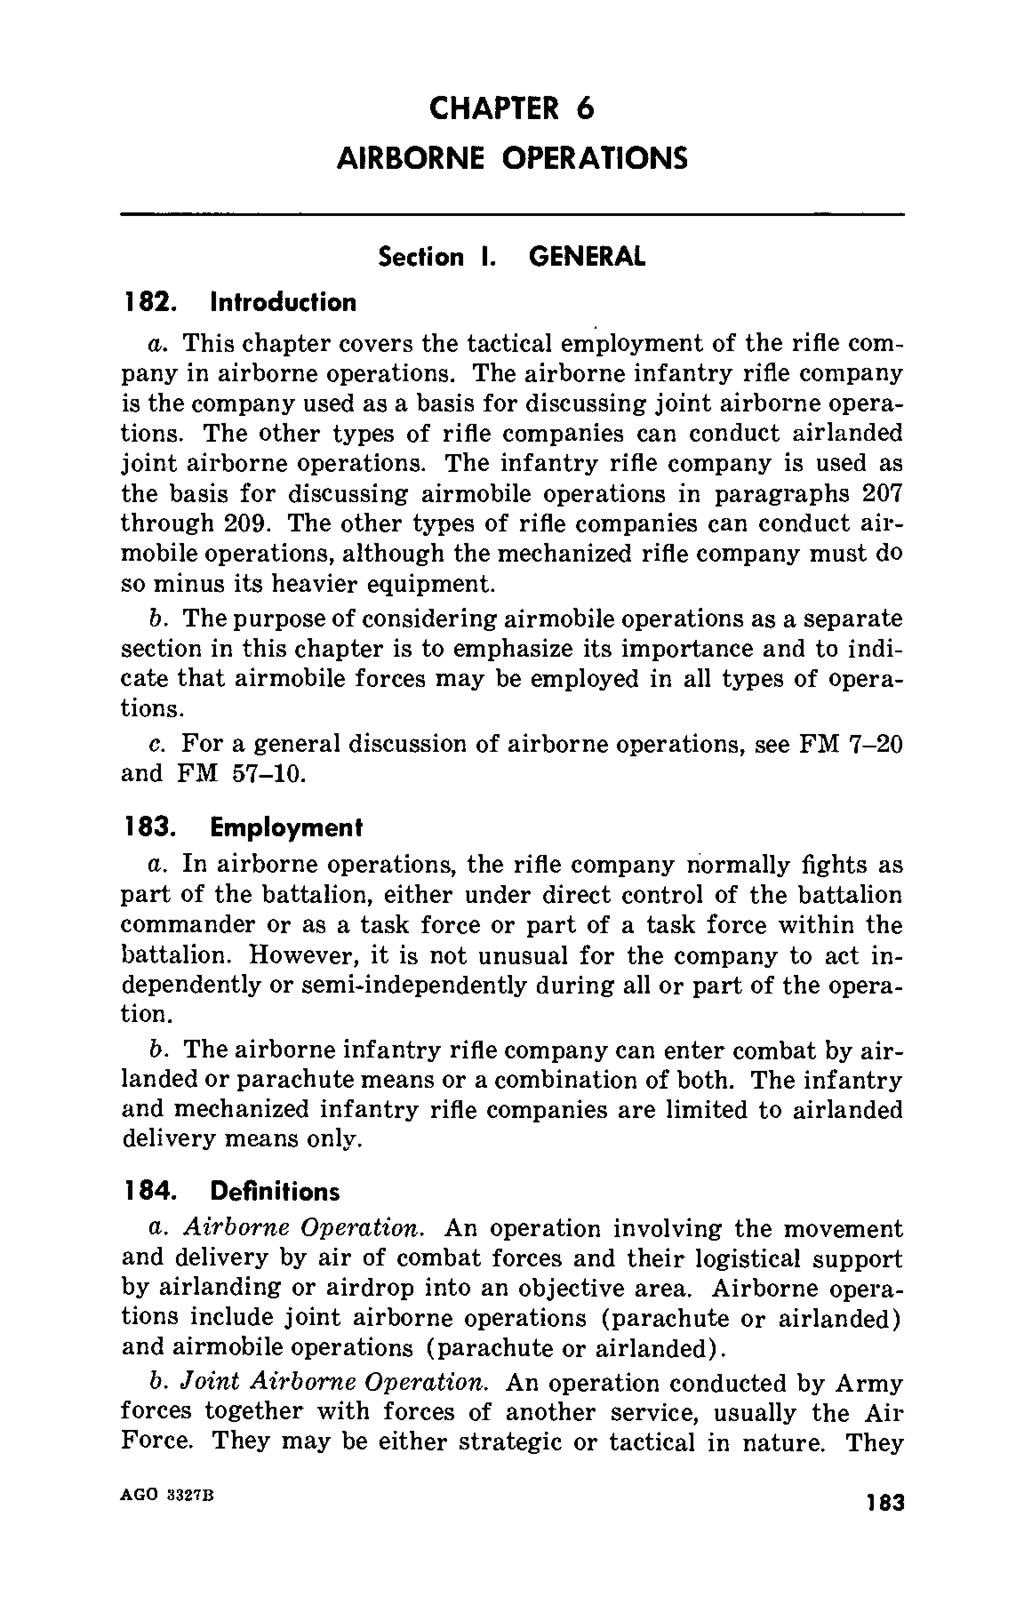 CHAPTER 6 AIRBORNE OPERATIONS Section I. GENERAL 182. Introduction a. This chapter covers the tactical employment of the rifle company in airborne operations.